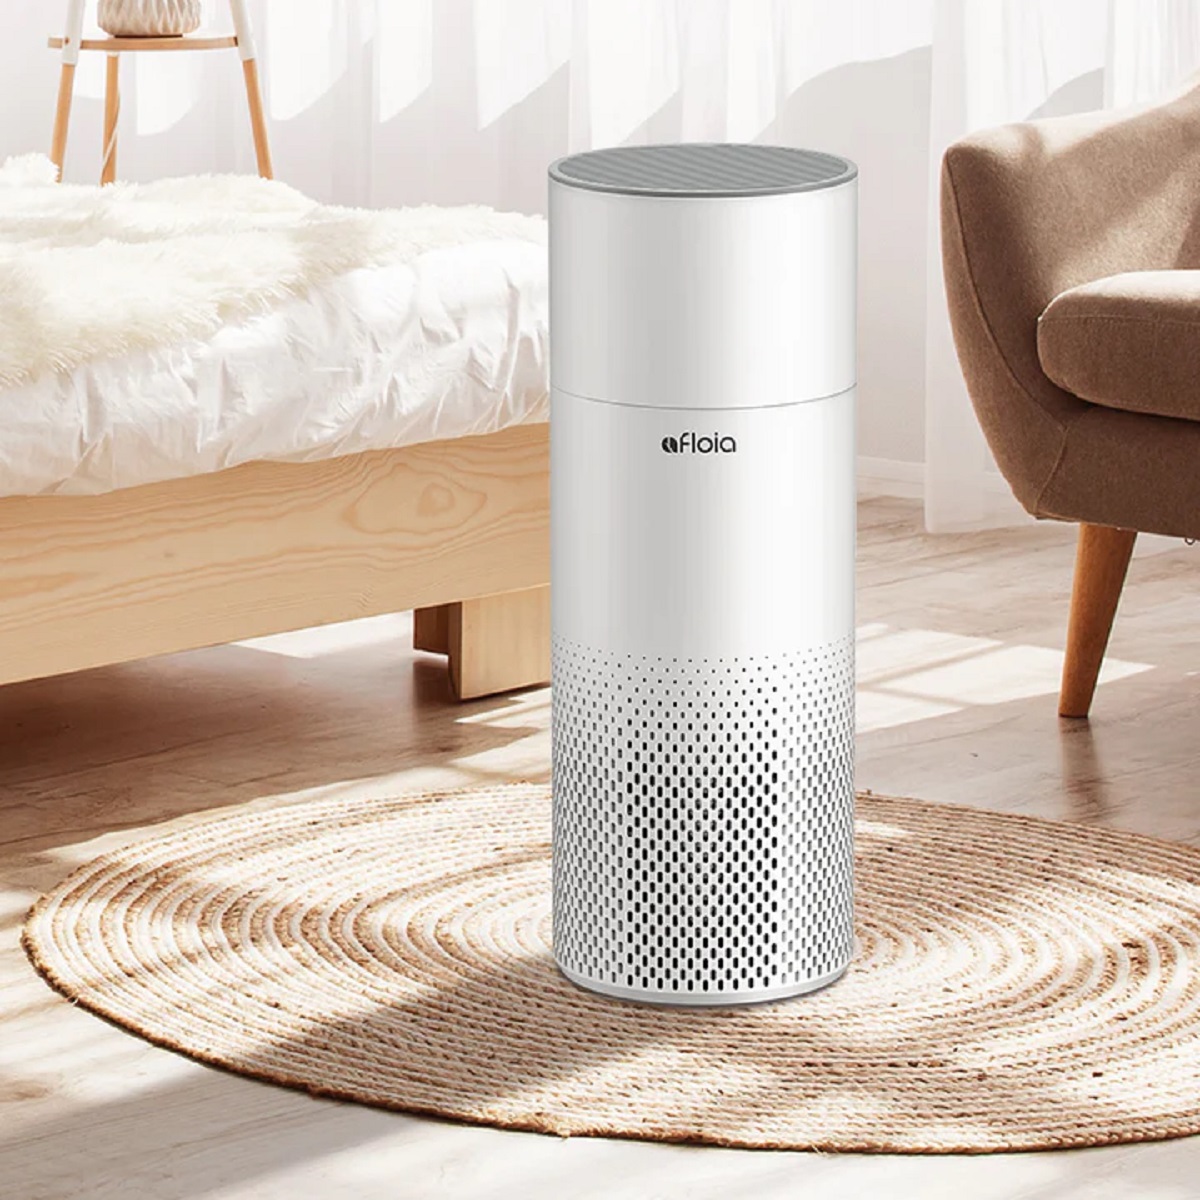 Afloia Air Purifier Filter Replacement: The Ultimate Solution for Clean and Fresh Indoor Air